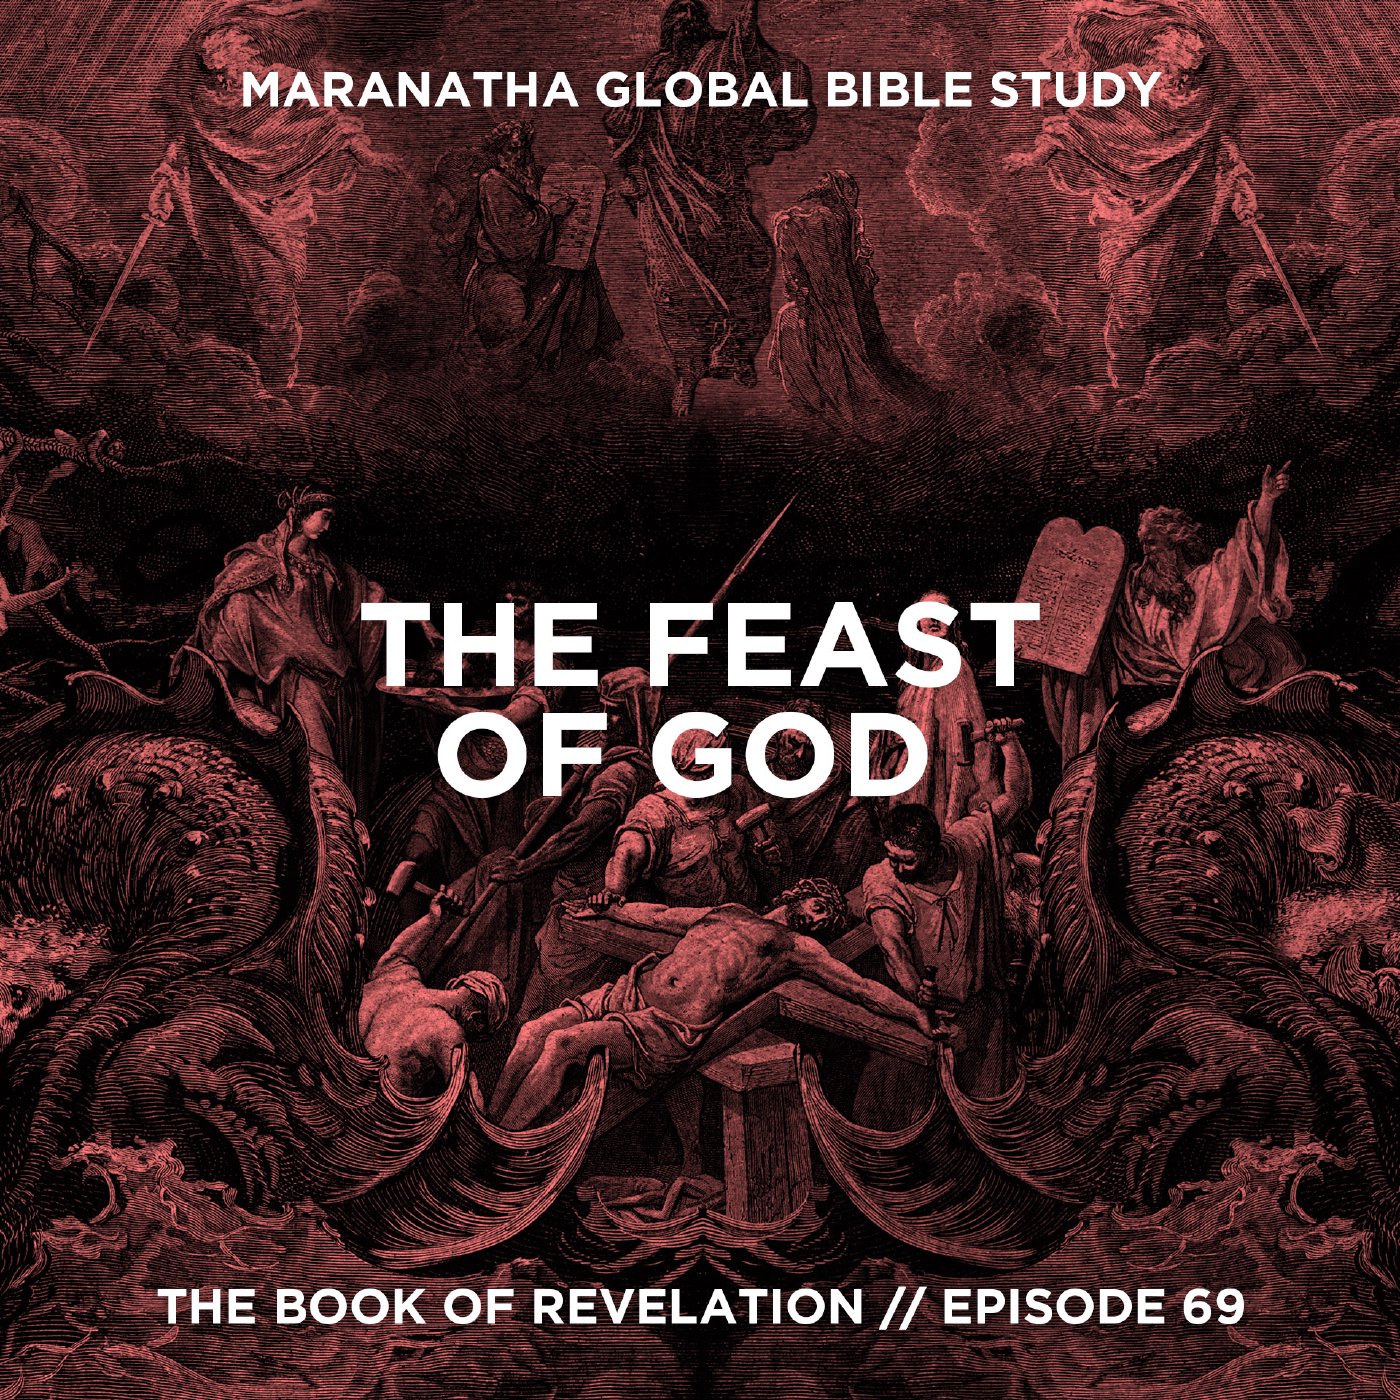 The Feast of God // THE BOOK OF REVELATION with JOEL RICHARDSON